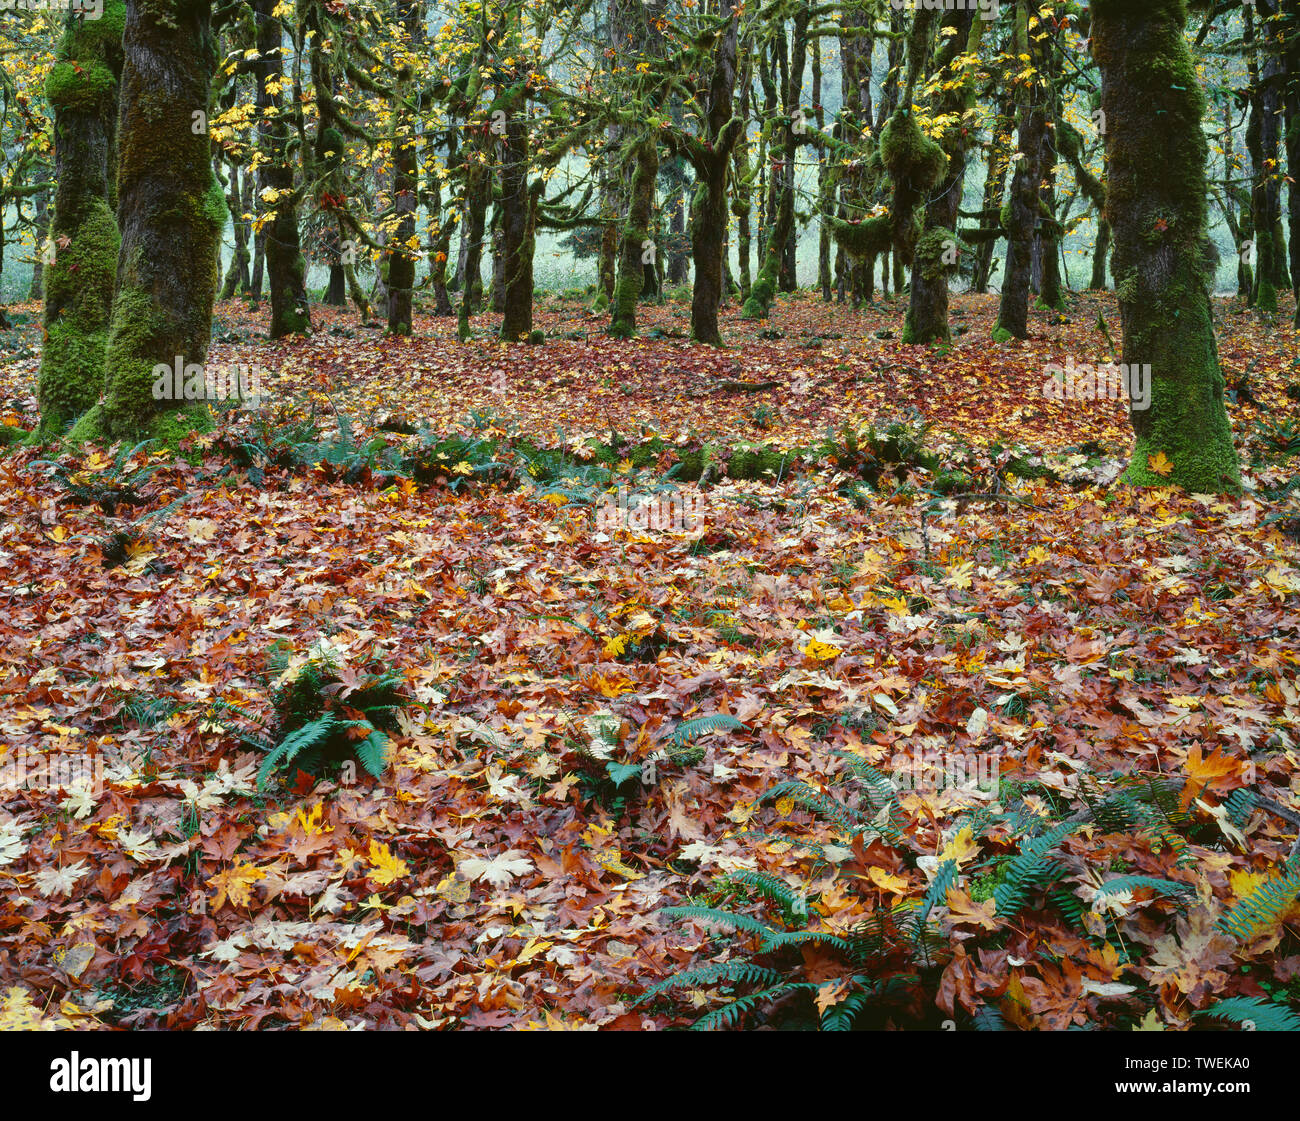 USA, Washington, Olympic National Park, Moss laden bigleaf maples and understory of ferns and fallen leaves in autumn; Quinault Rain Forest. Stock Photo